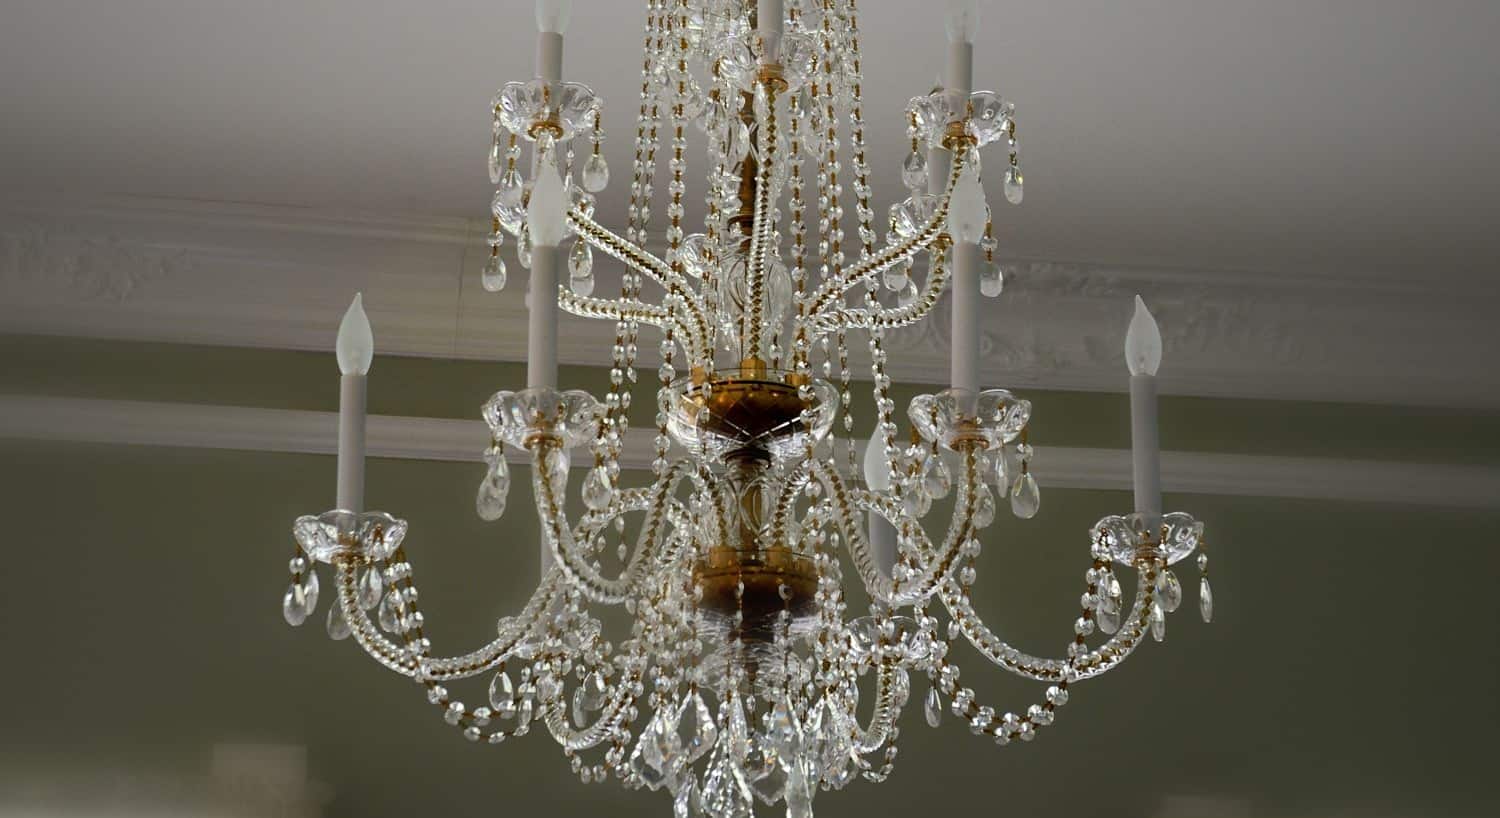 Elegant brass and crystal chandelier with candelabra bulbs